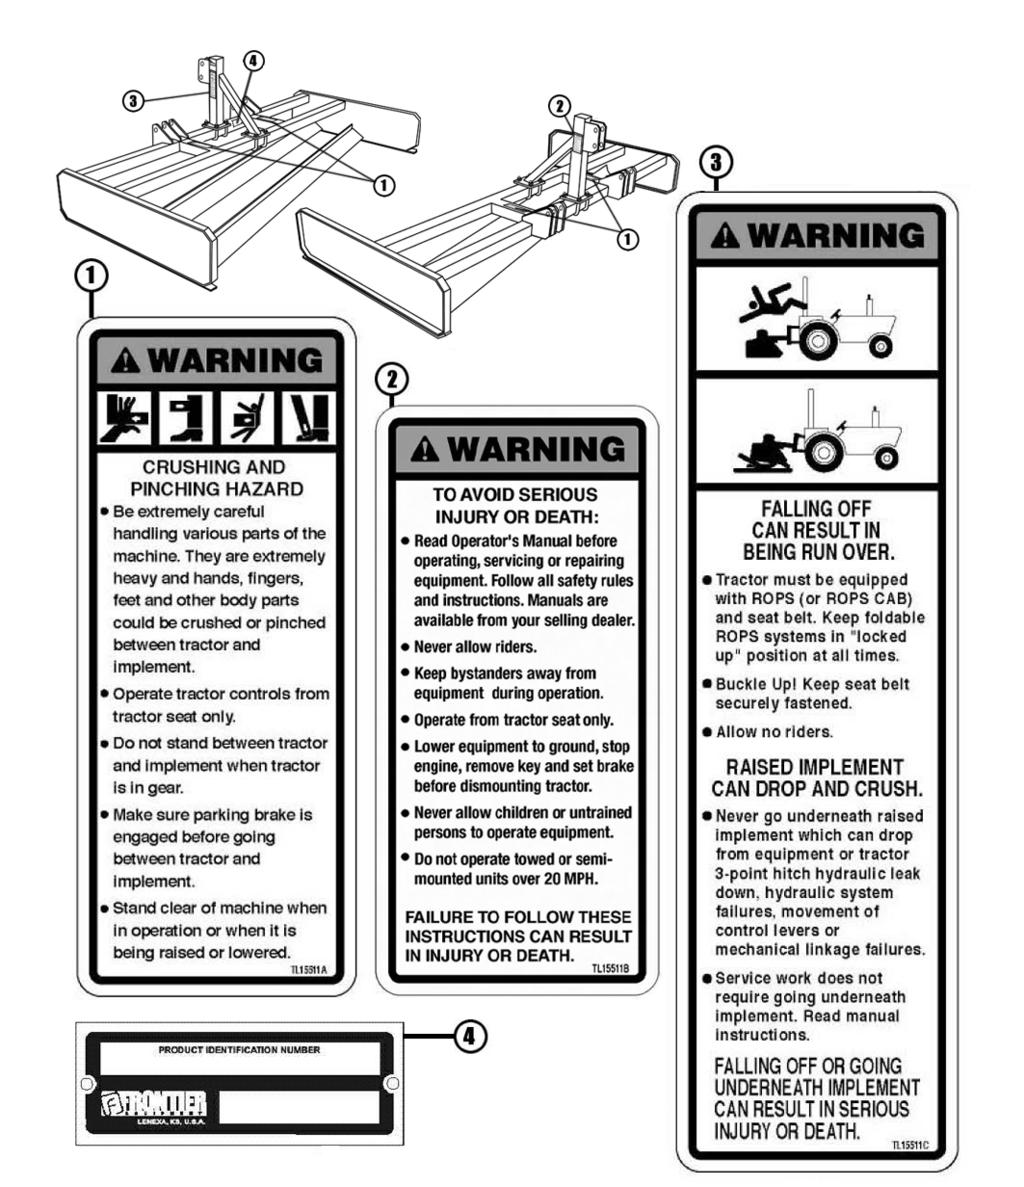 SAFETY & INSTRUCTIONAL DECALS ATTENTION! BECOME ALERT! YOUR SAFETY IS INVOLVED! FAILURE TO FOLLOW THESE INSTRUCTIONS COULD RESULT IN SERIOUS INJURY OR DEATH Replace Decals Immediately If Damaged!